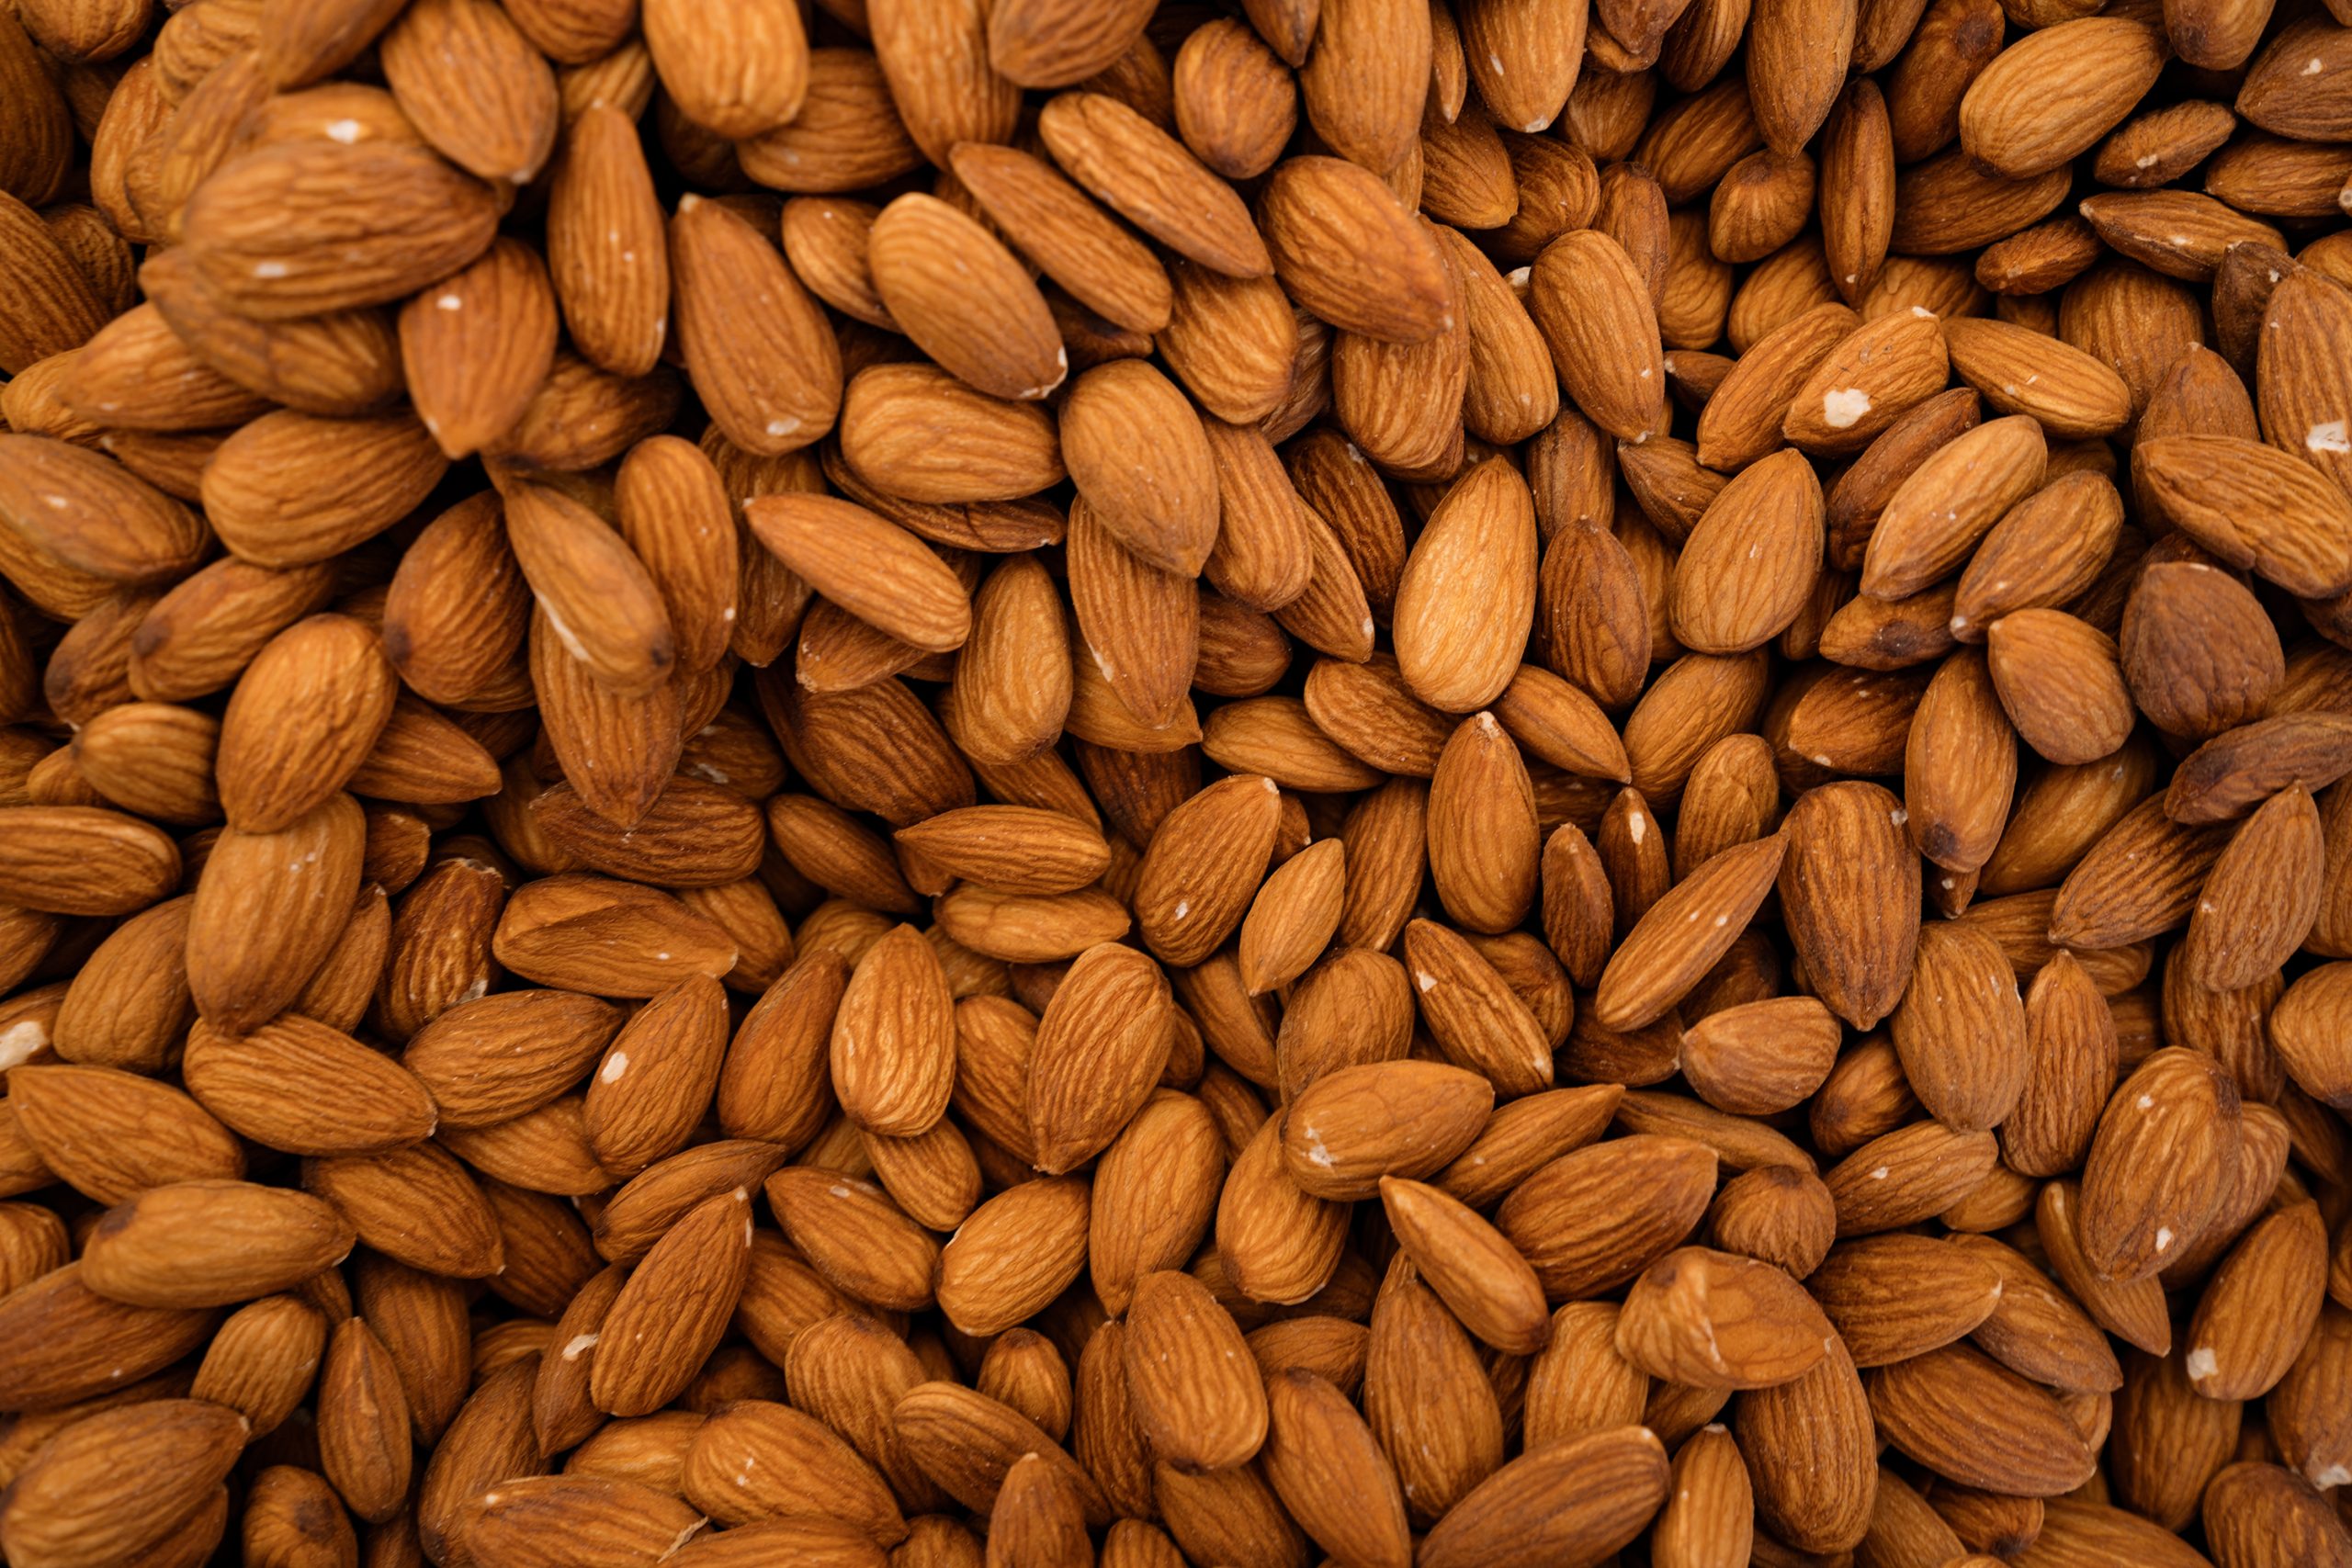 Almonds for Delayed Menstrual Cycle